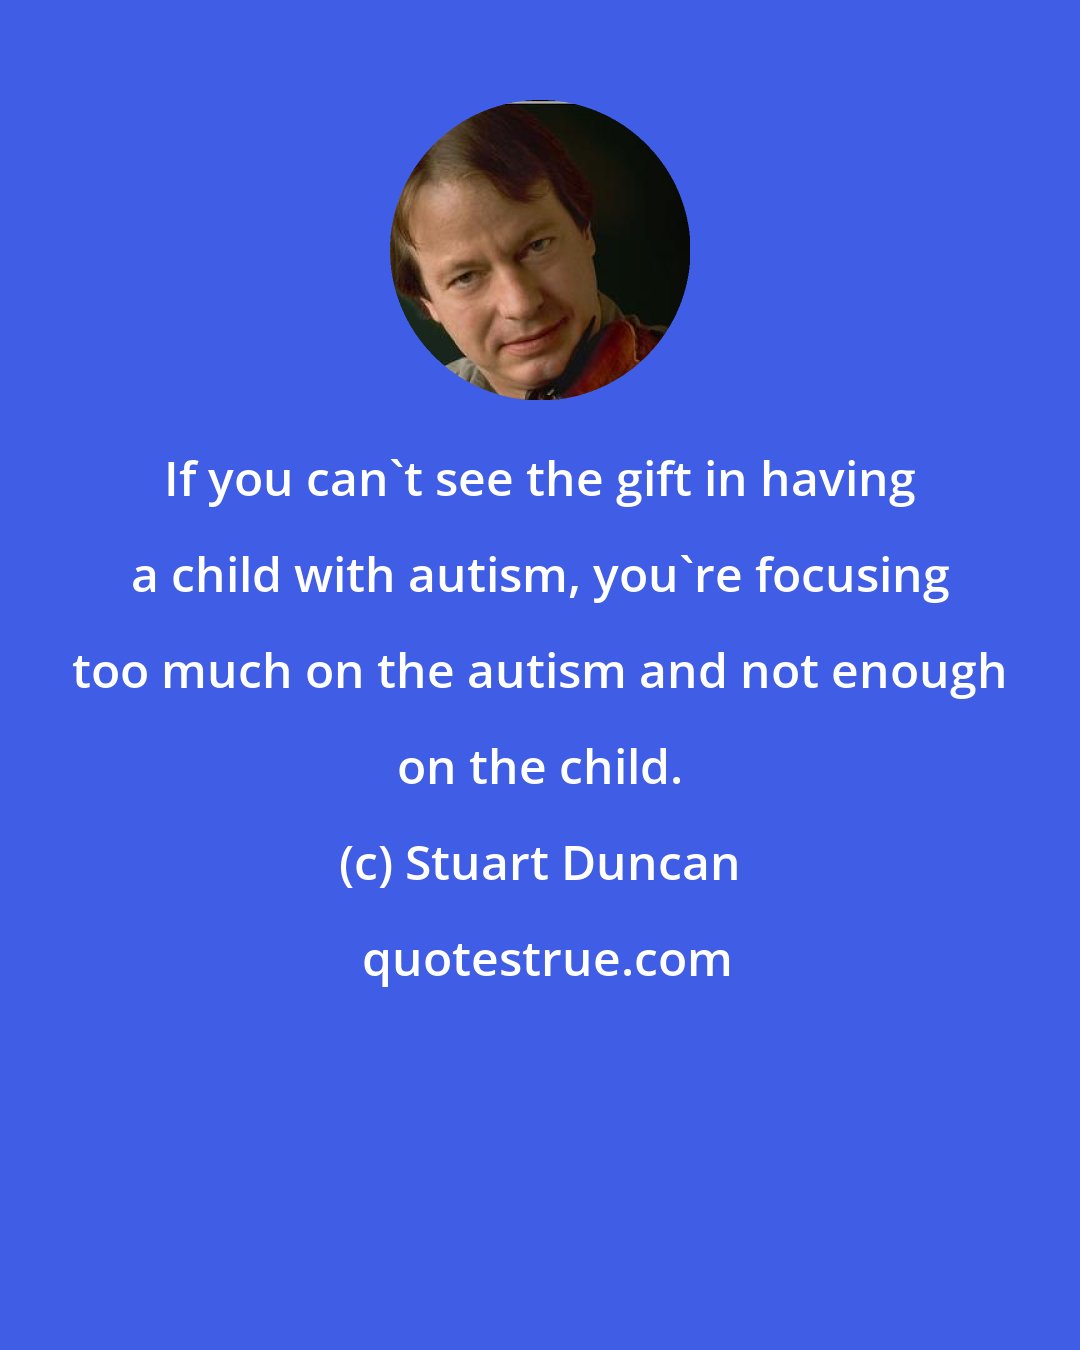 Stuart Duncan: If you can't see the gift in having a child with autism, you're focusing too much on the autism and not enough on the child.